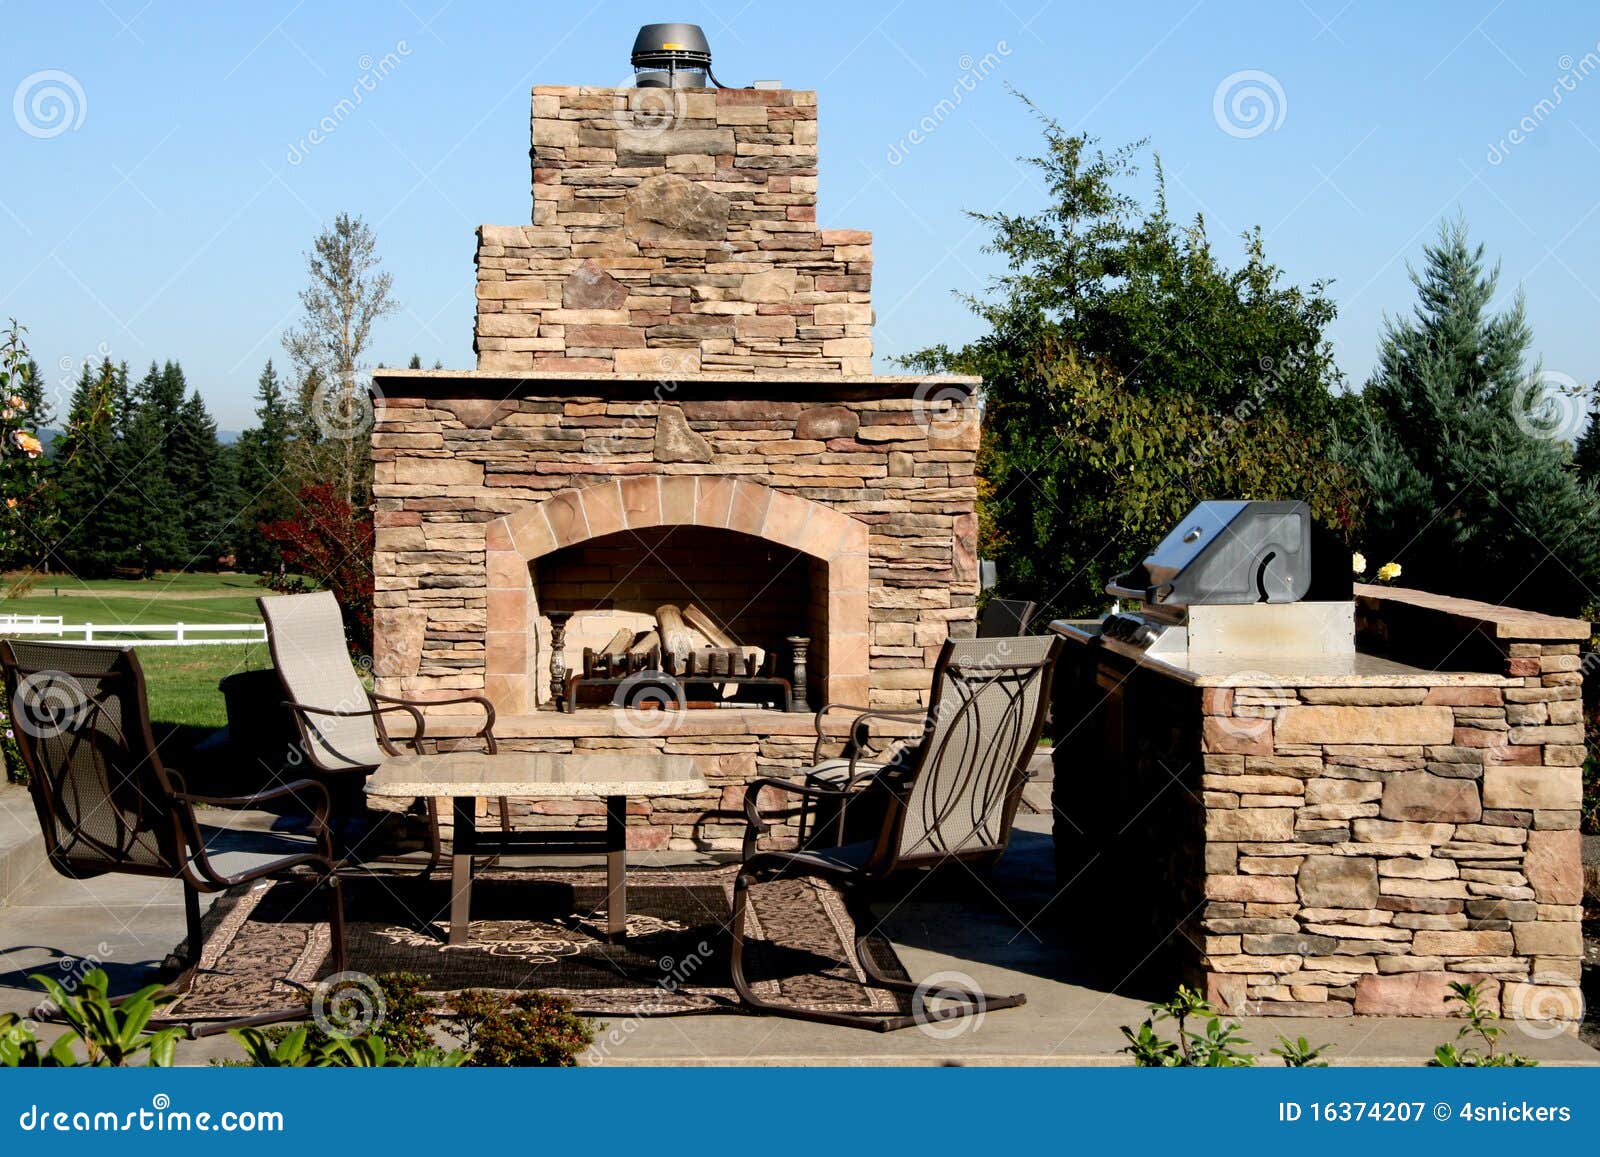 the outdoor kitchen